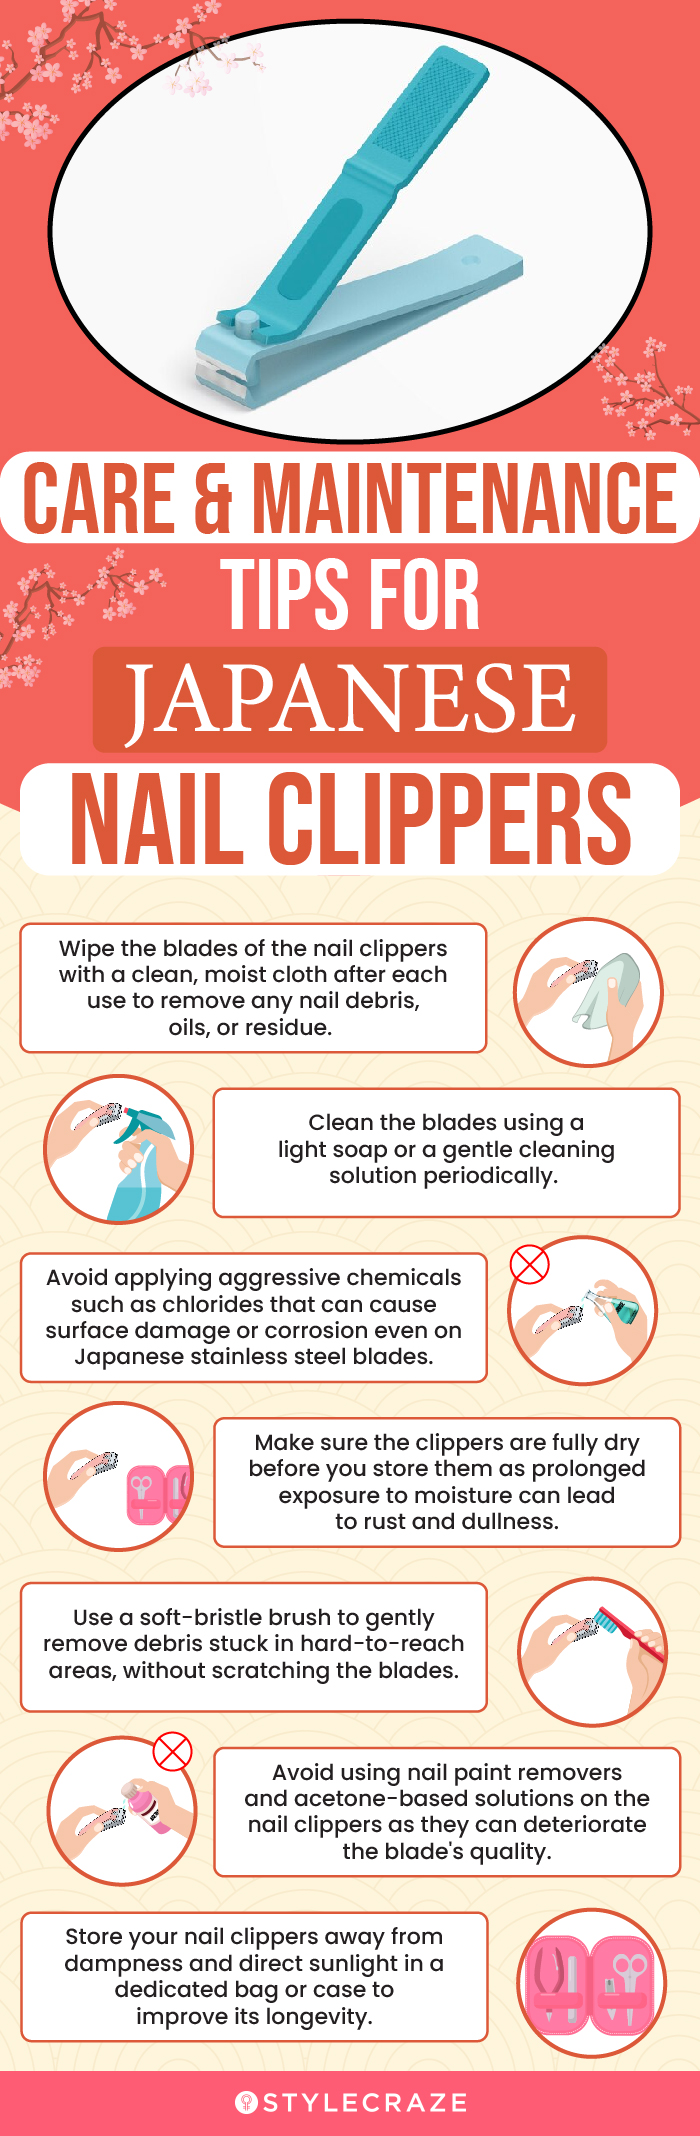 Japanese Nail Clipper: Care And Maintenance Tips (infographic)